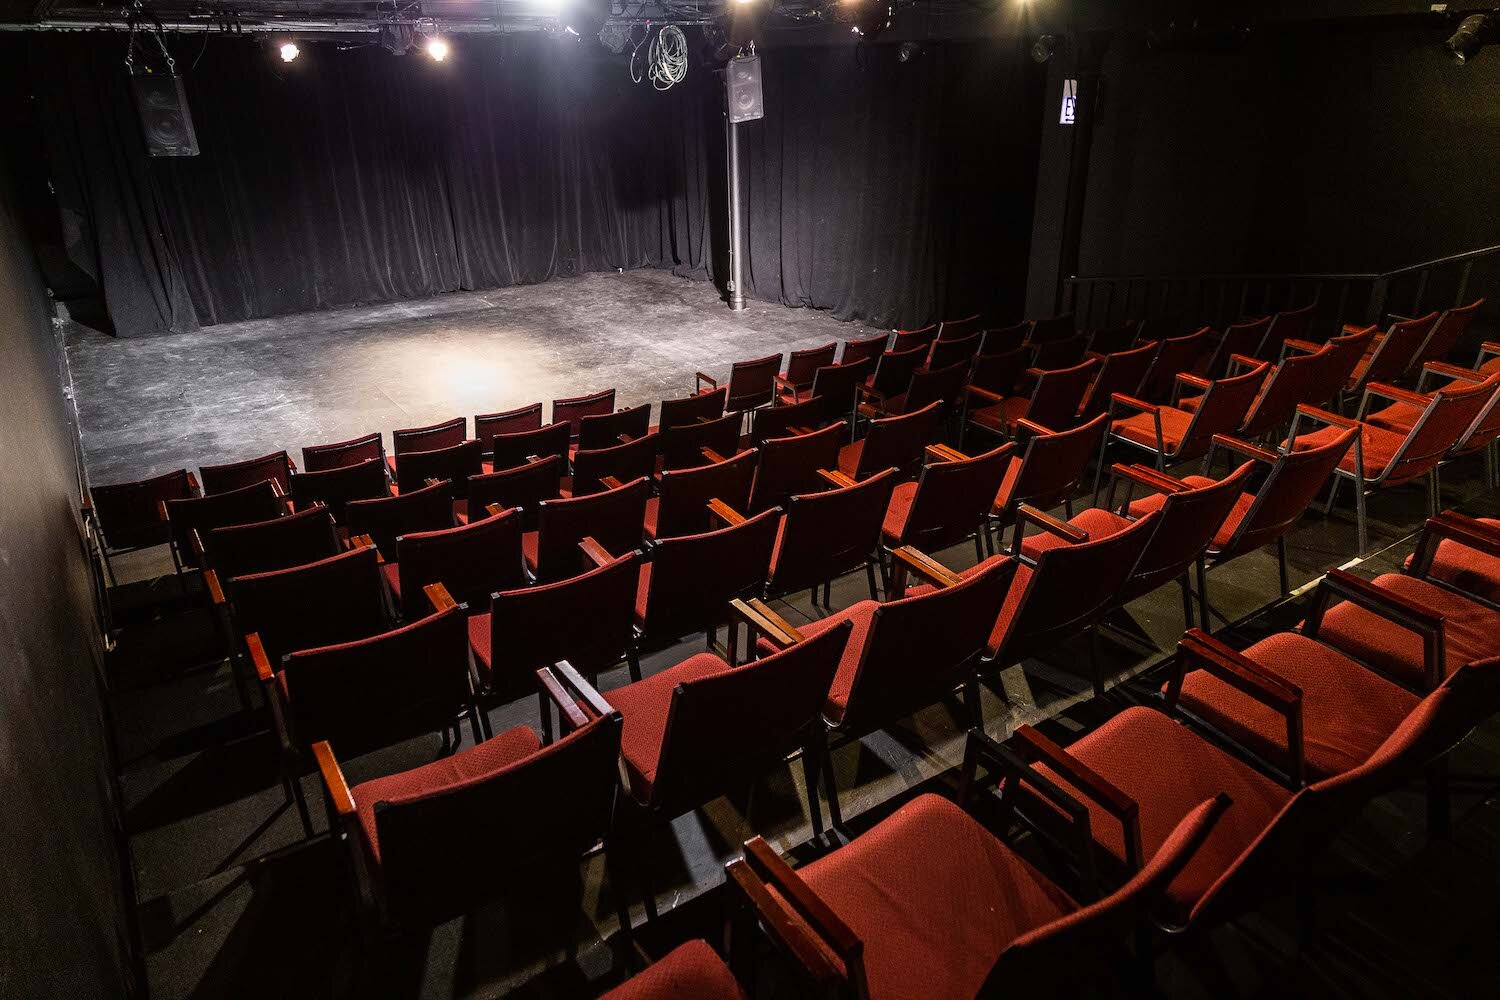 the-den-theatre-ryanmartin-thedentheatre-chicago-wicker-park-comedyshow-standup-comedy-music-must-see-performance-music-venue-book-theden-26-2.jpg